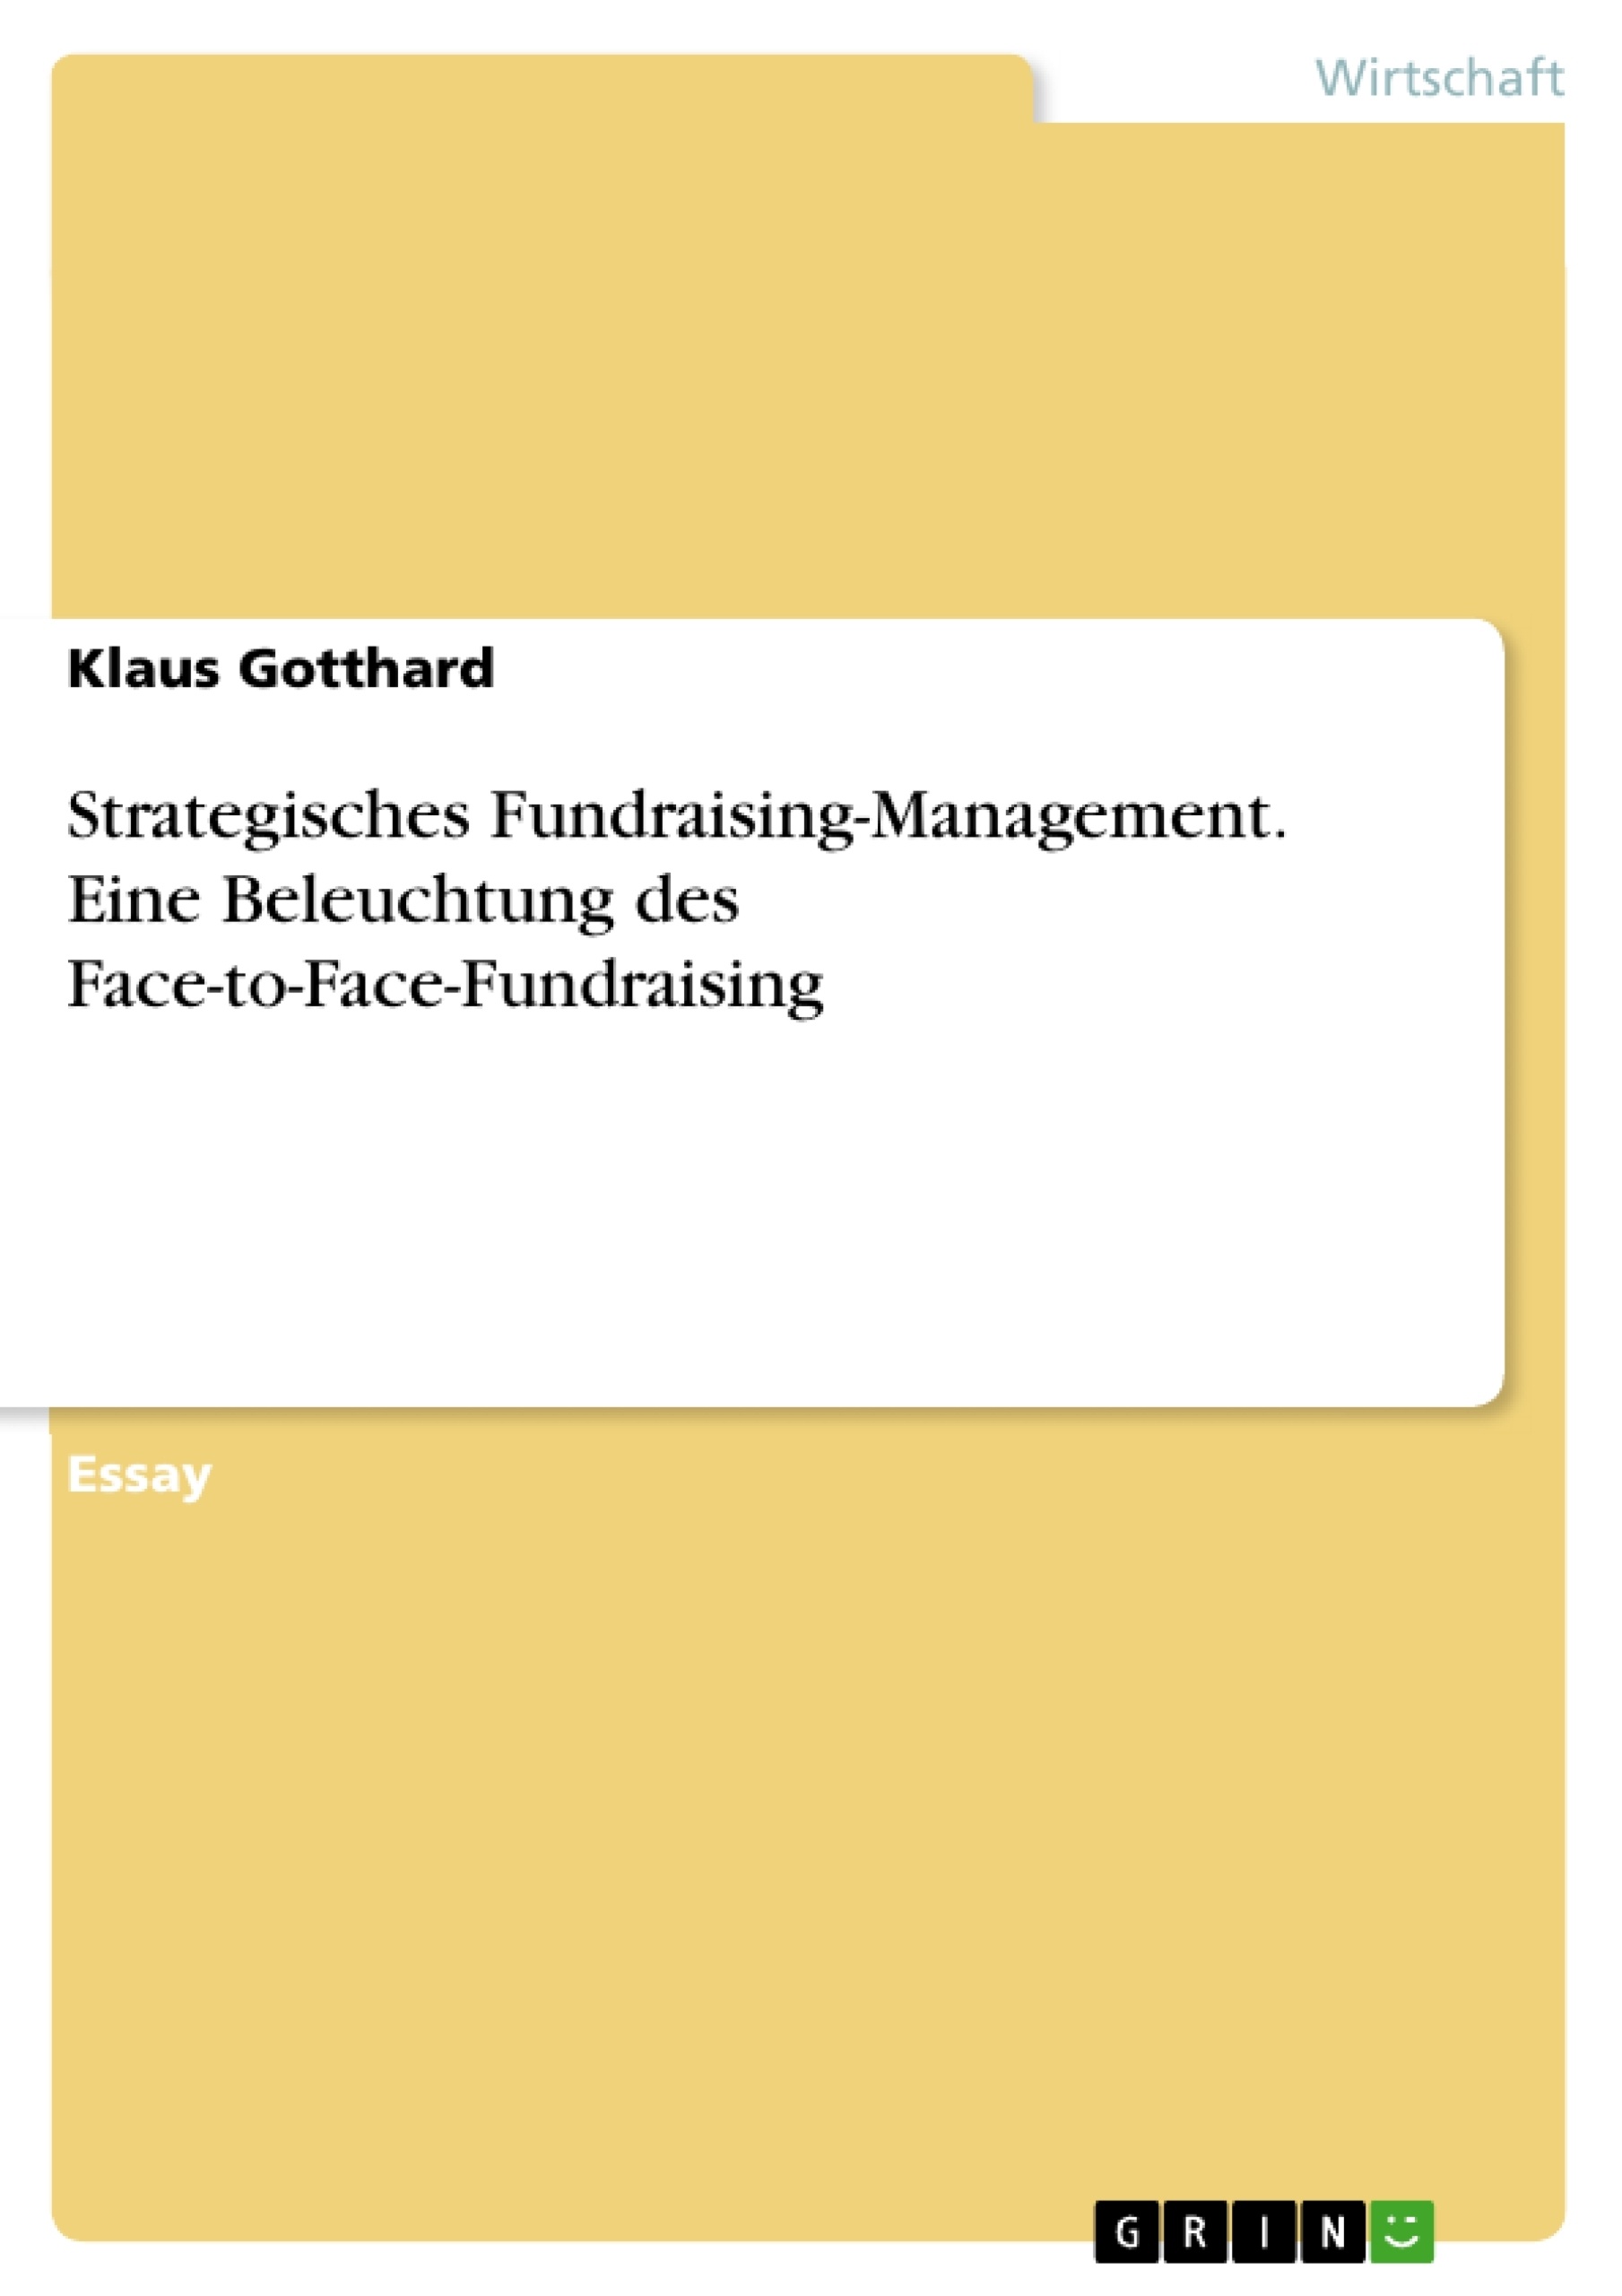 Título: Strategisches Fundraising-Management. Eine Beleuchtung des Face-to-Face-Fundraising